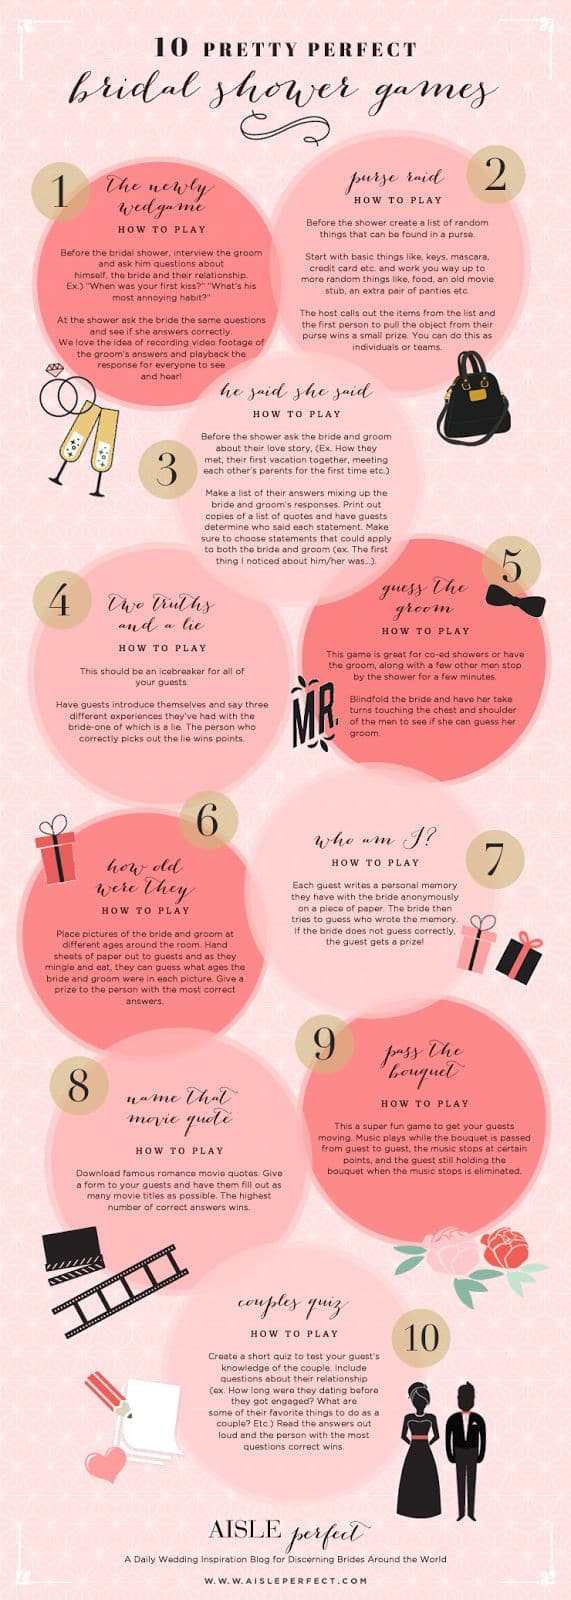 10 Pretty Perfect Bridal Shower Games Infographic